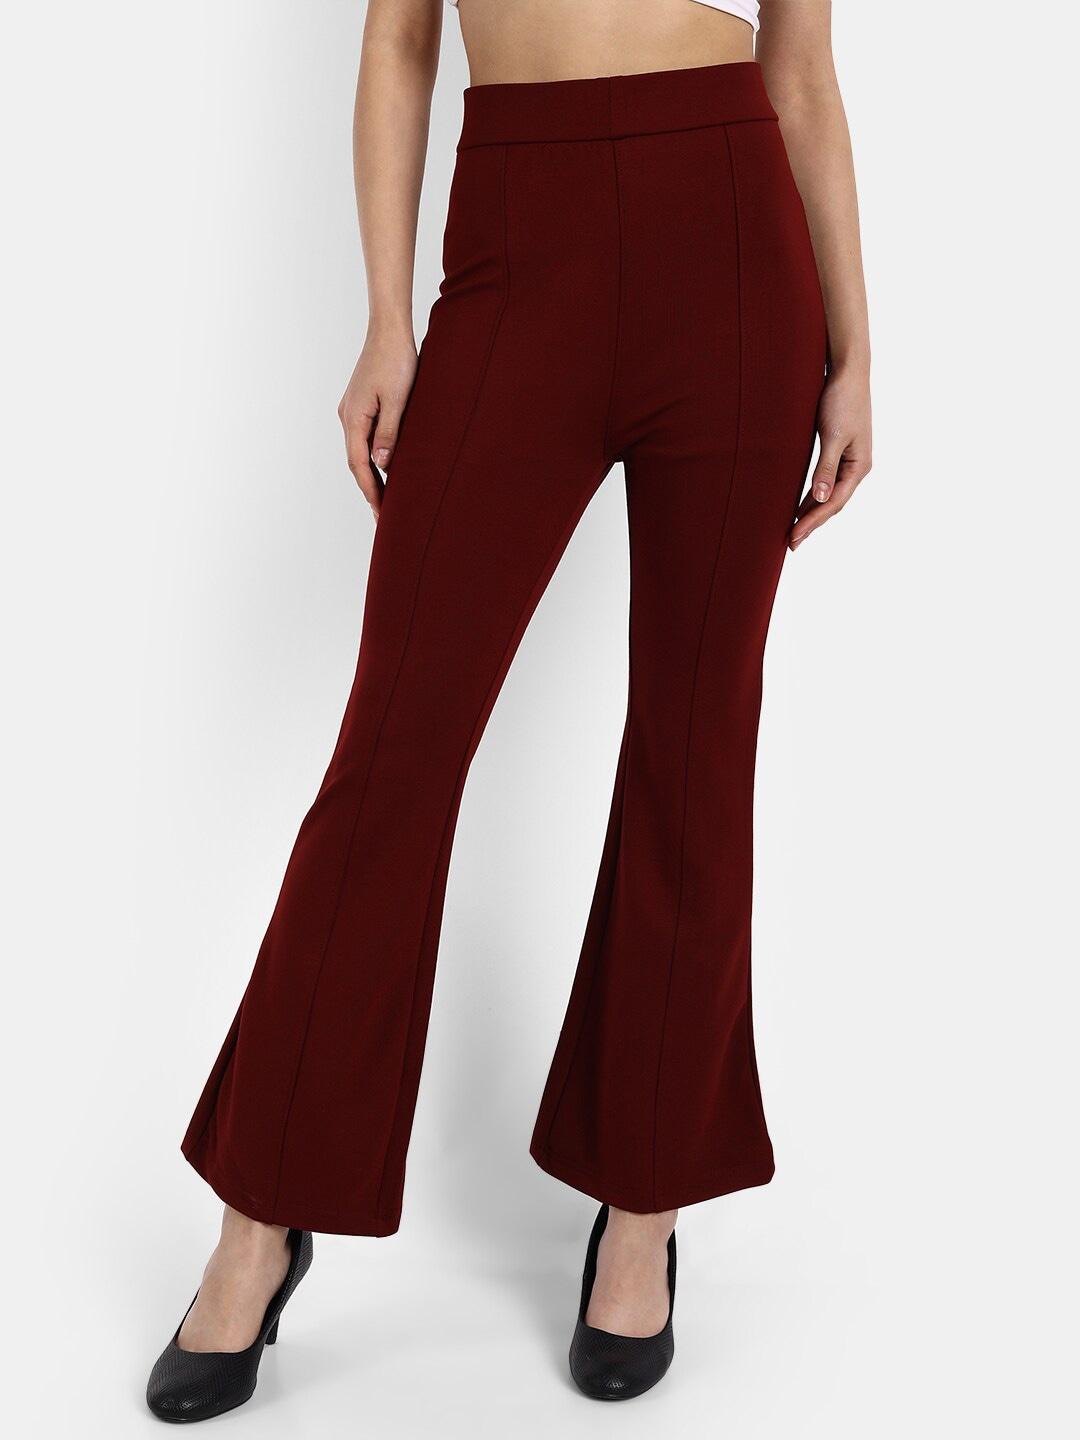 next-one-women-maroon-solid-skinny-fit-jeggings